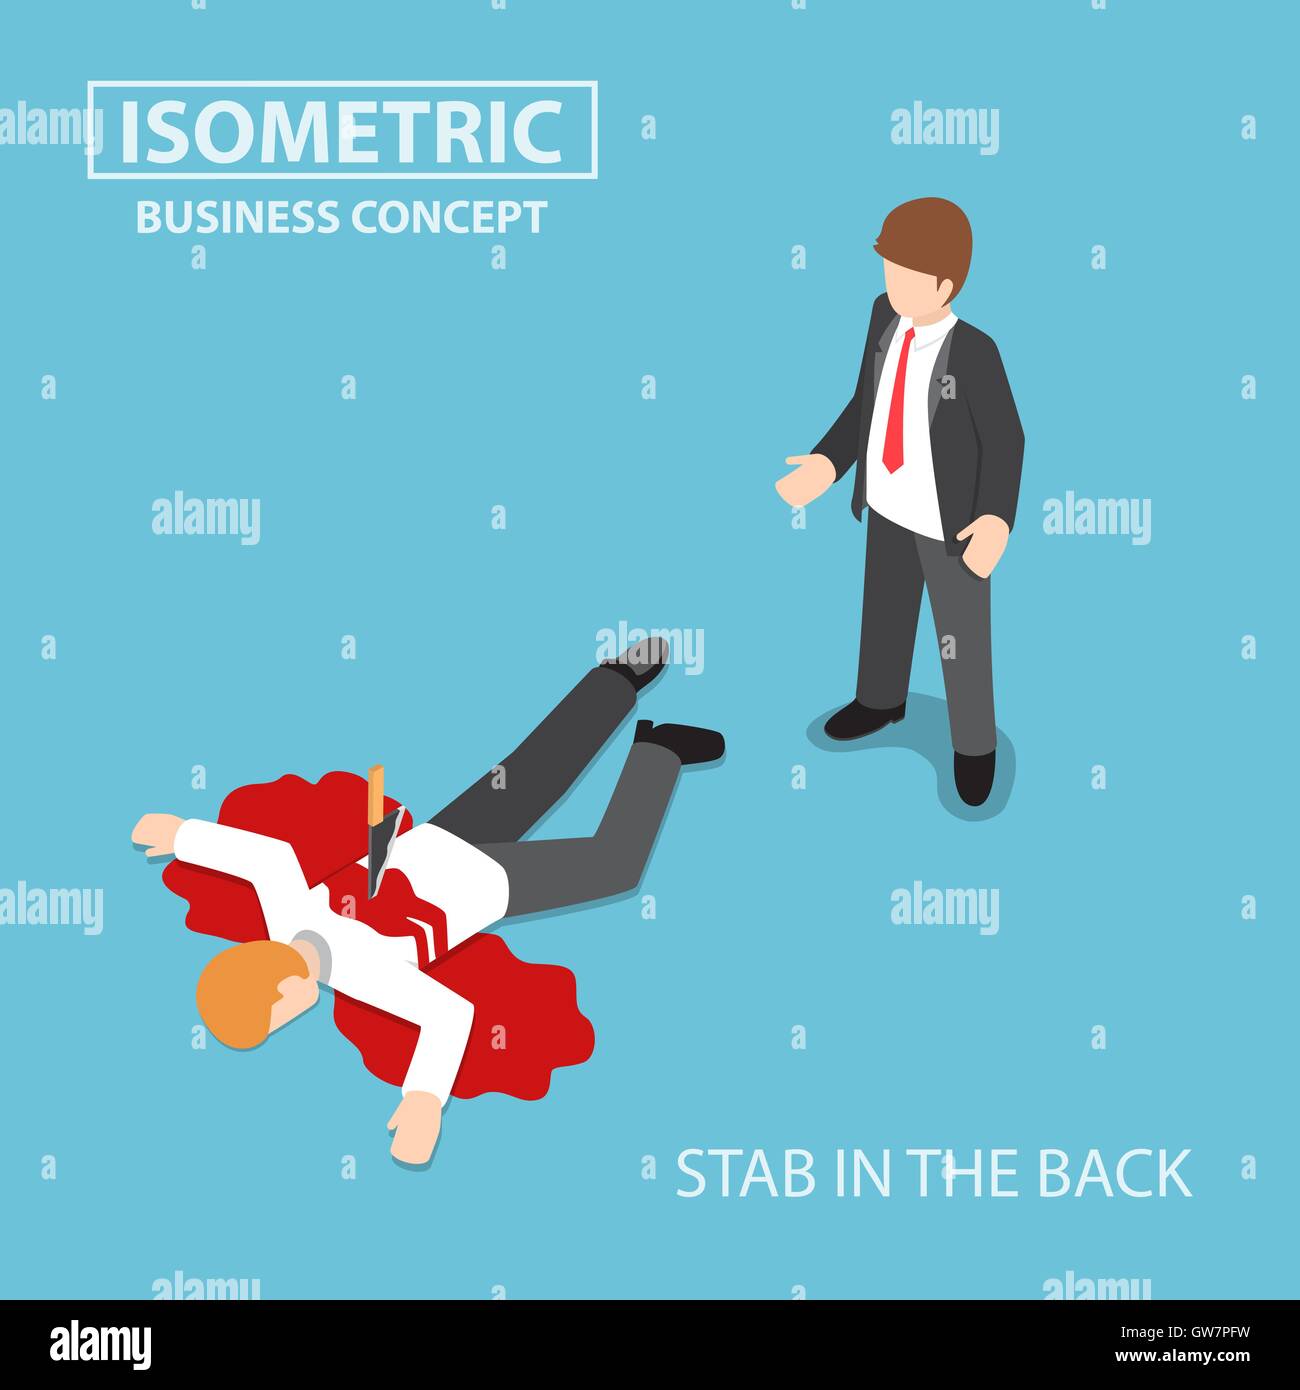 Flat 3d isometric businessman is stabbed in the back by his colleague, betrayal and conflict with business partner concept Stock Vector